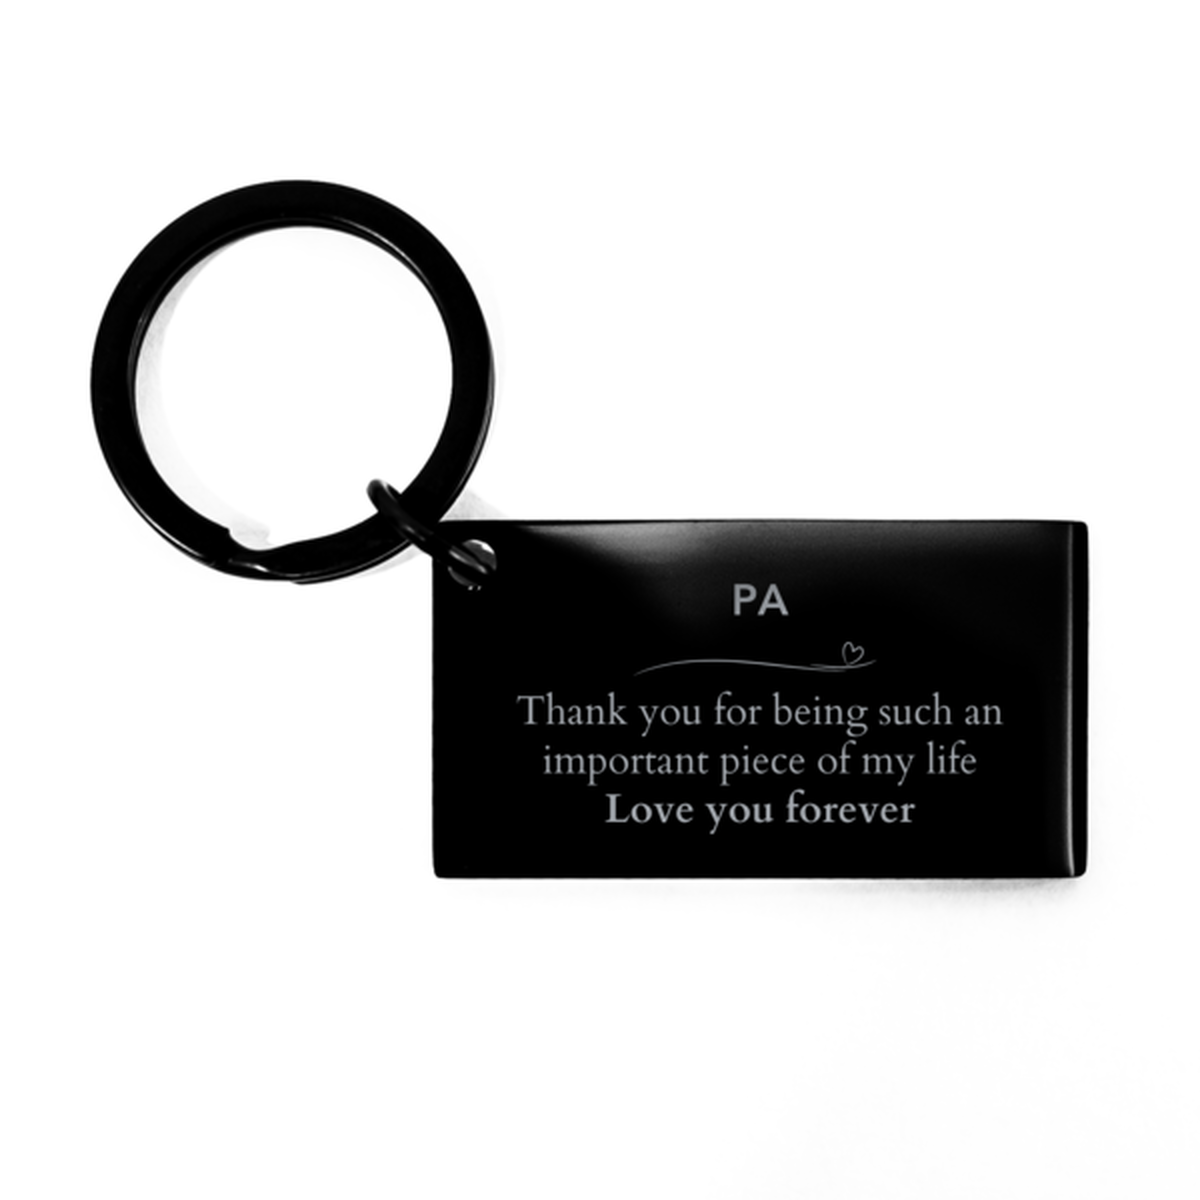 Appropriate Pa Keychain Epic Birthday Gifts for Pa Thank you for being such an important piece of my life Pa Christmas Mothers Fathers Day